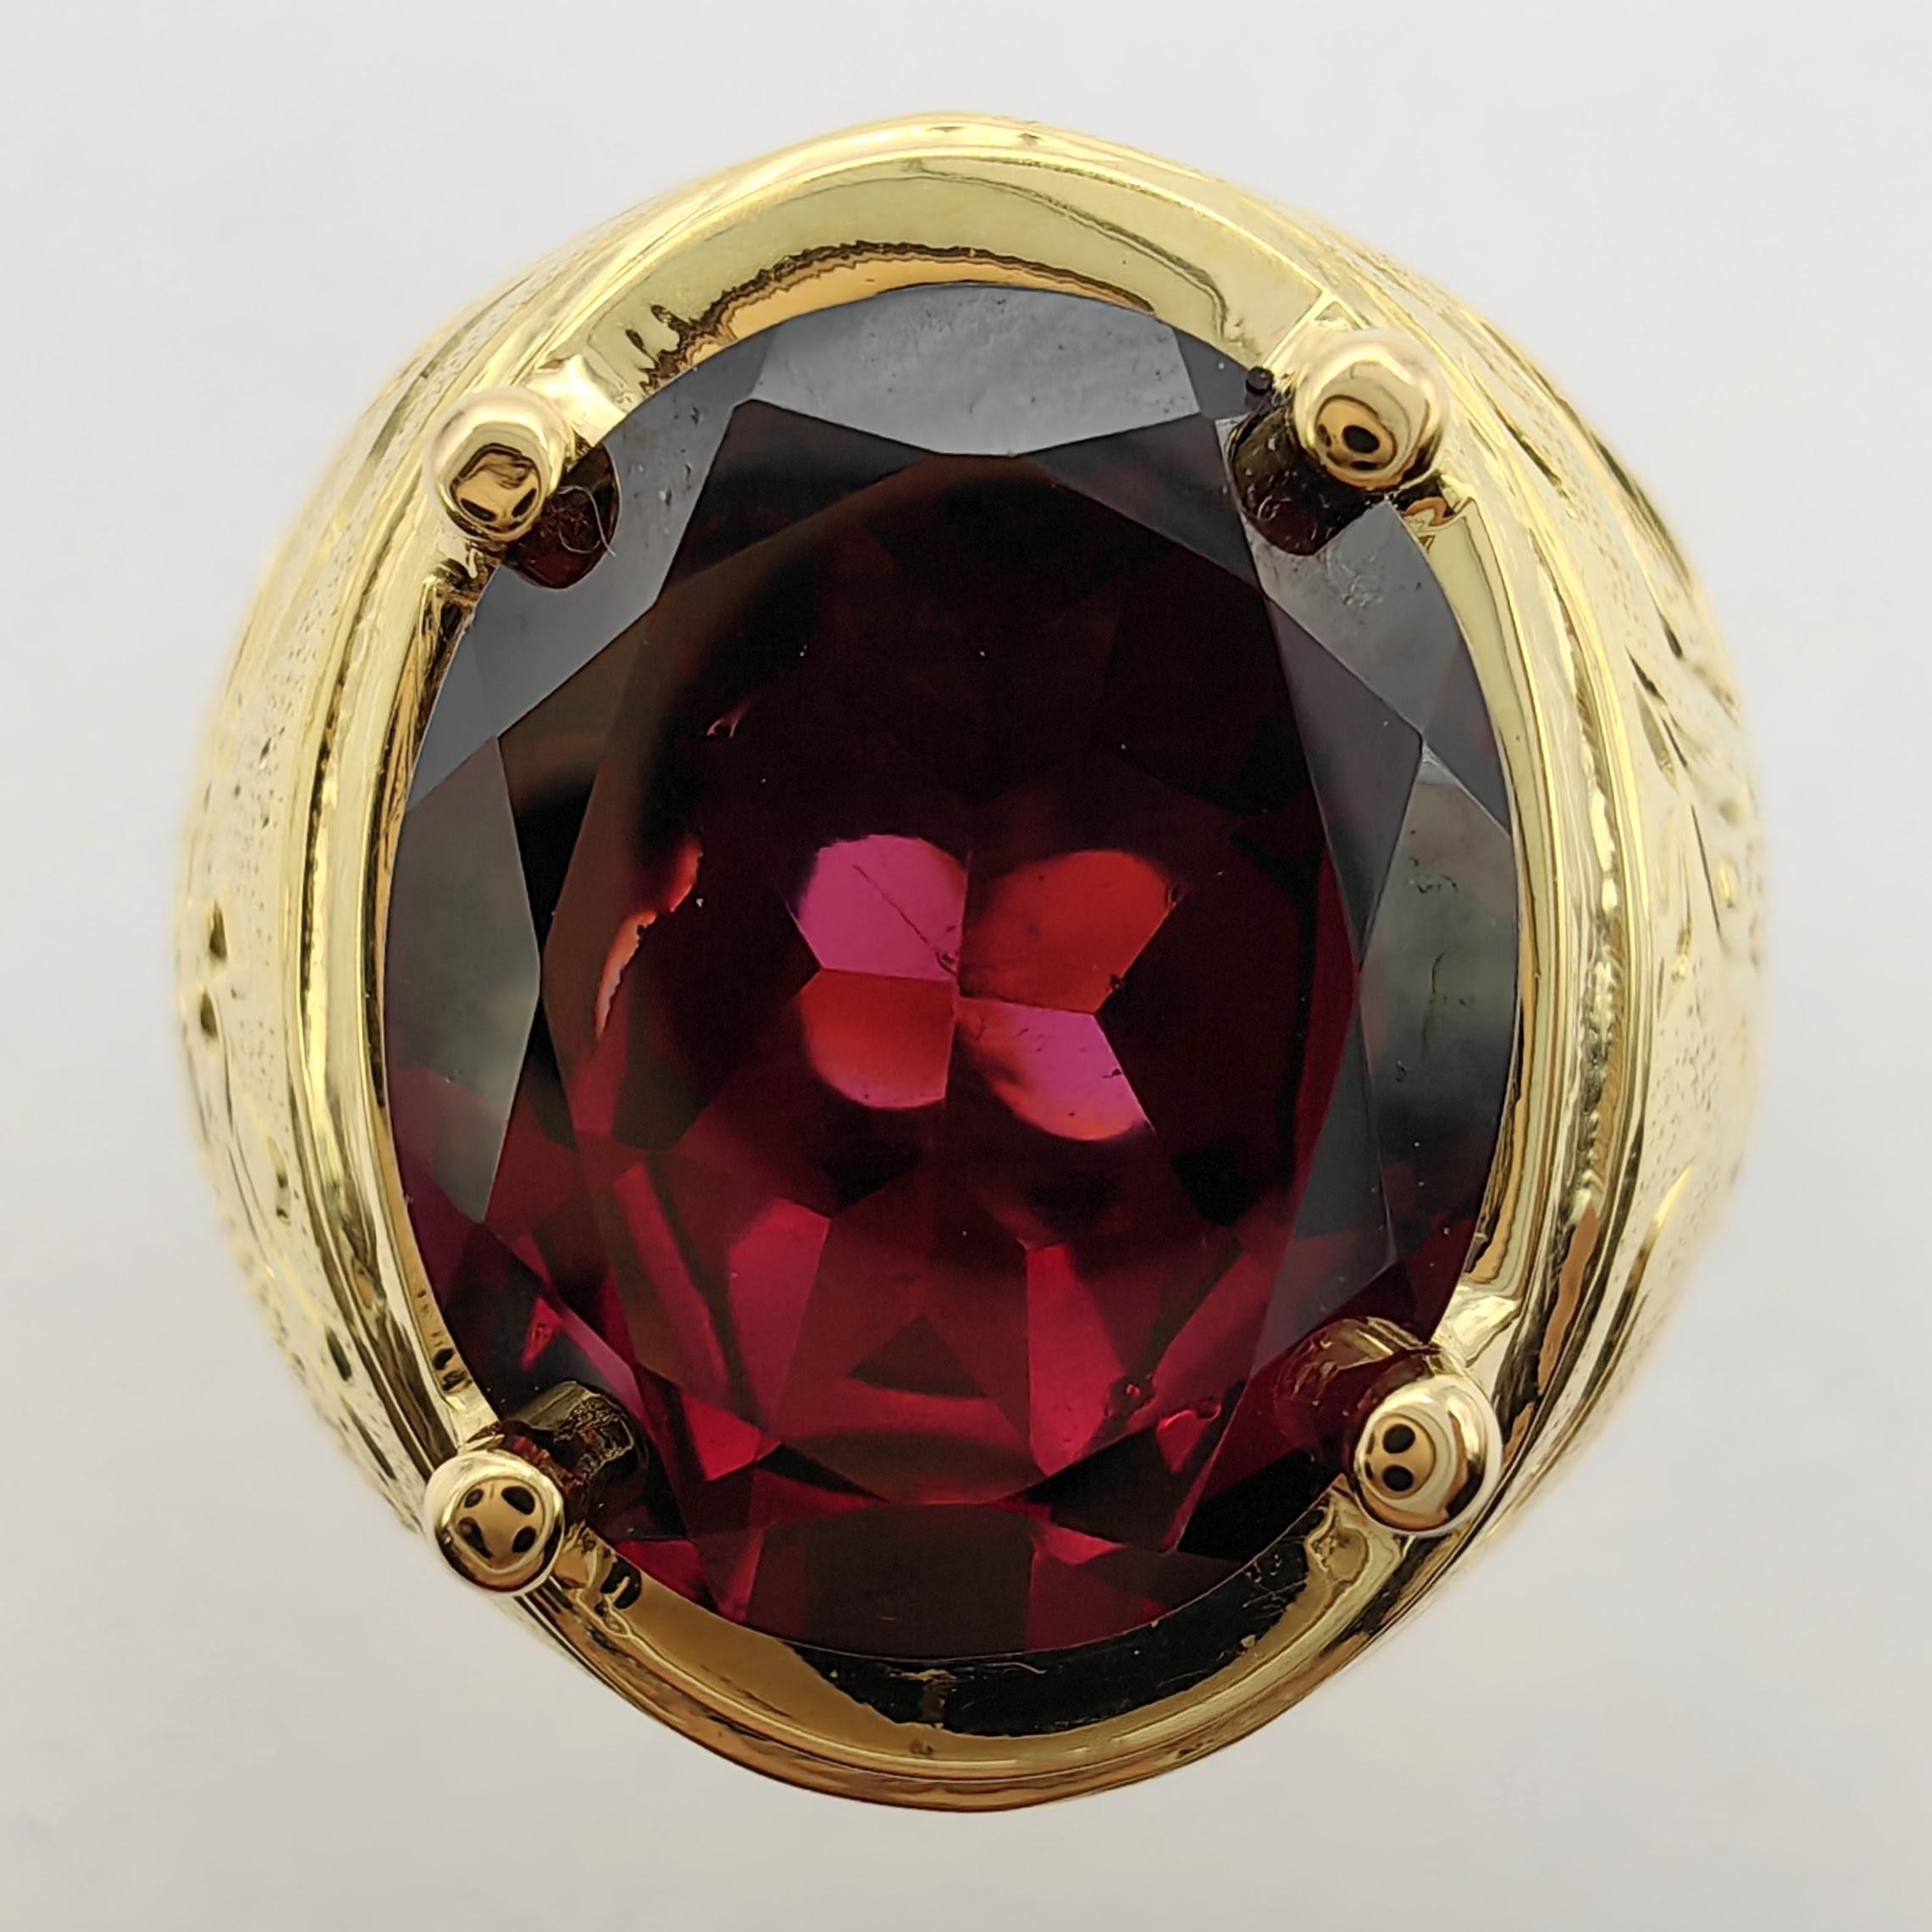 Introducing our Vintage 5.32 Carat Oval-cut Rubellite Dragon Phoenix Ring in 14K Yellow Gold, a symbol of strength, beauty, and timeless elegance.

This exceptional ring showcases a striking 5.32 carat oval-cut rubellite at its center, radiating a